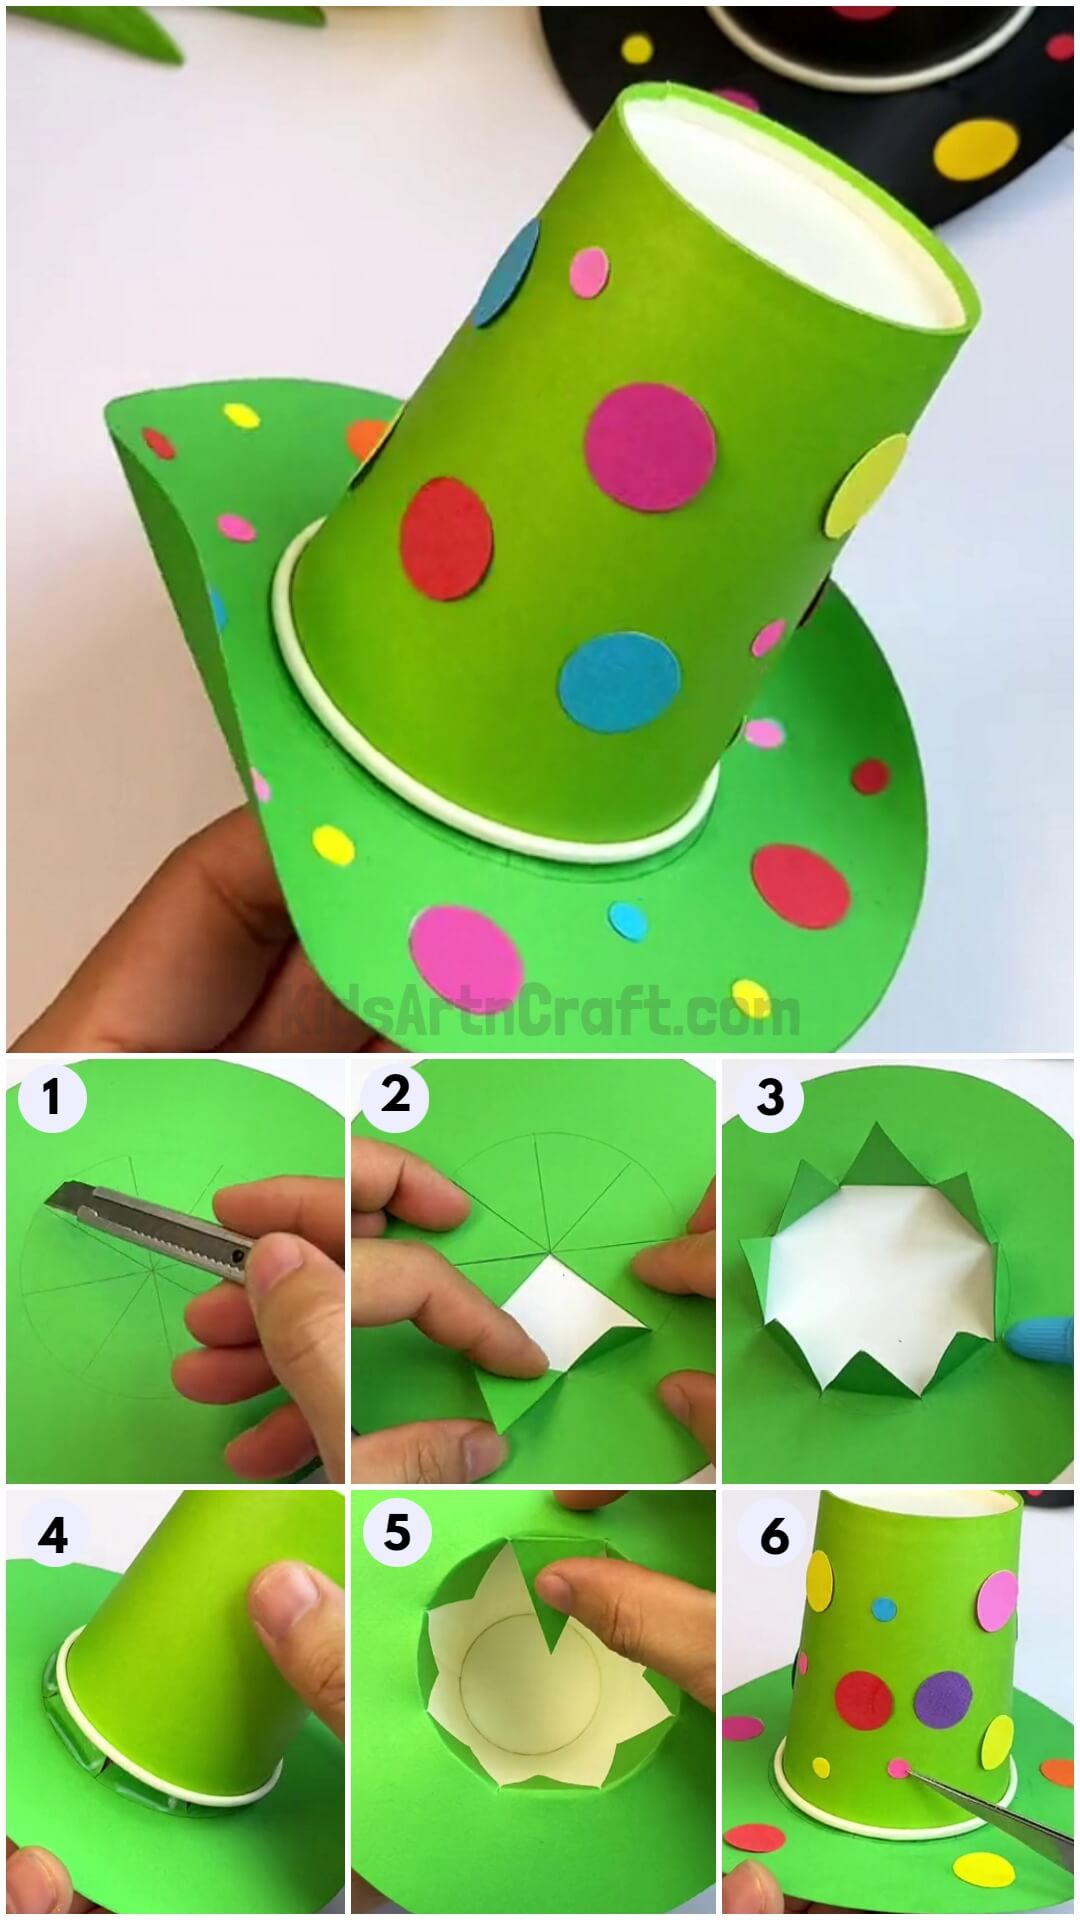 Easy To Make Mini Paper Cup Hat-Creative Mini Paper Cup Hat For Kids